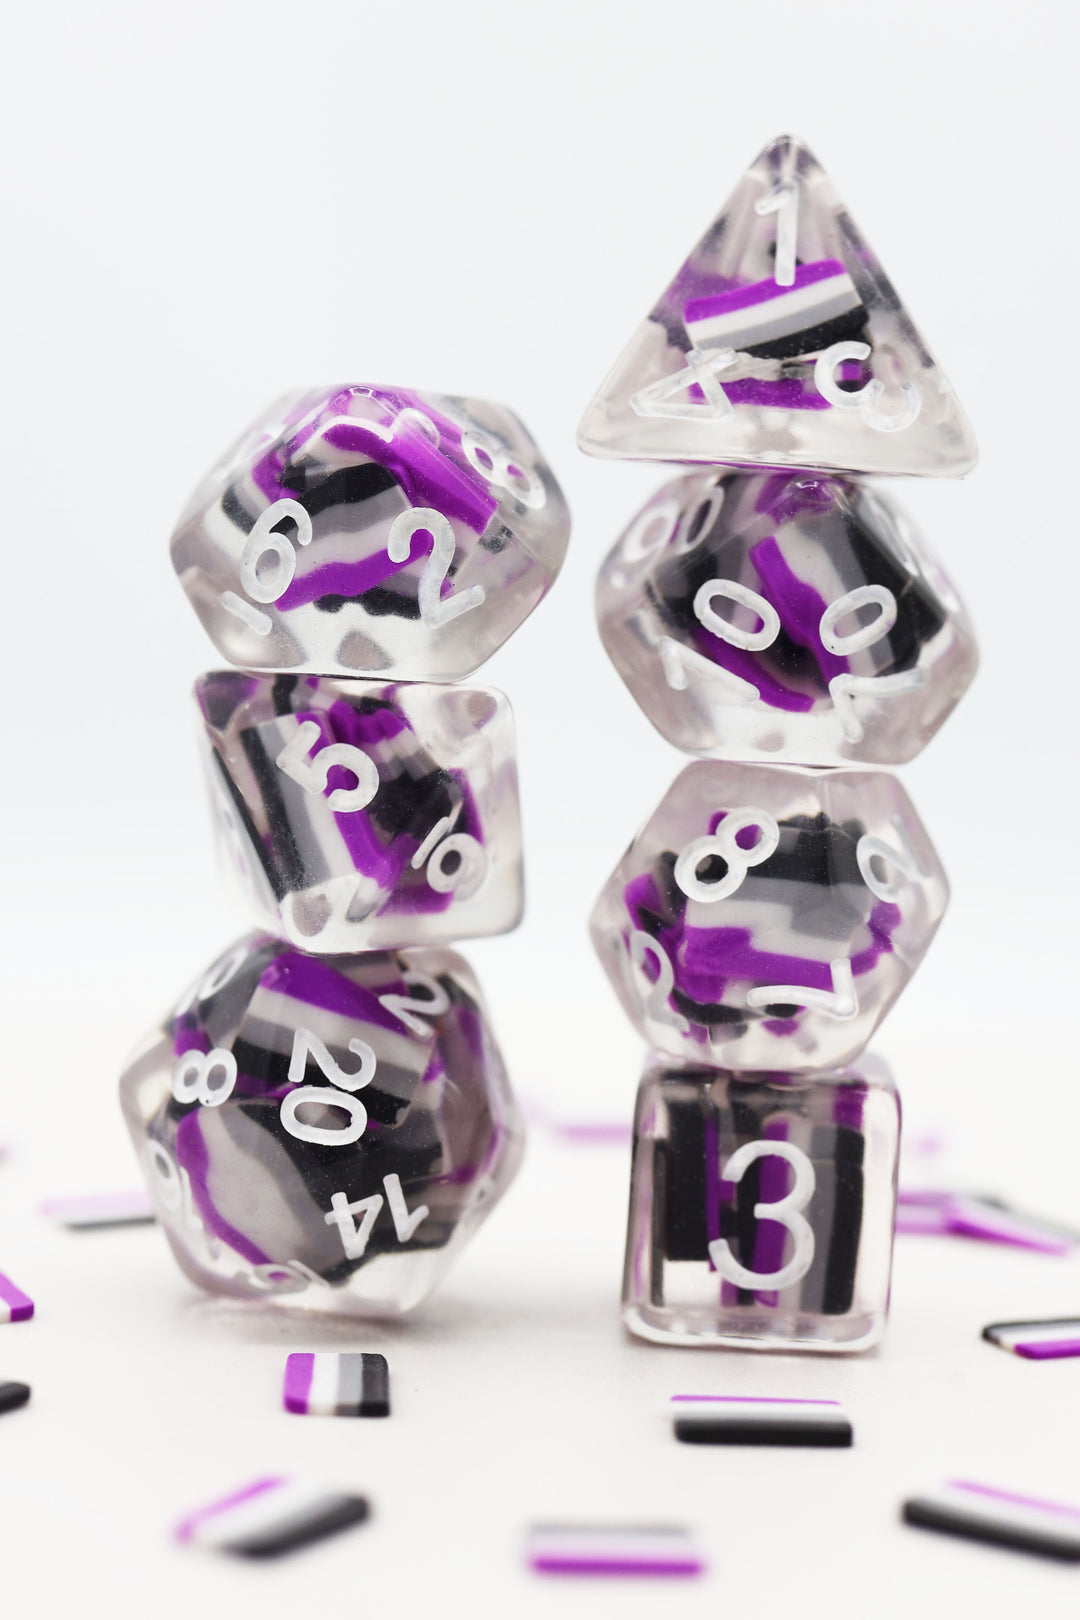 Asexual Flag Dice Set (7 Dice)